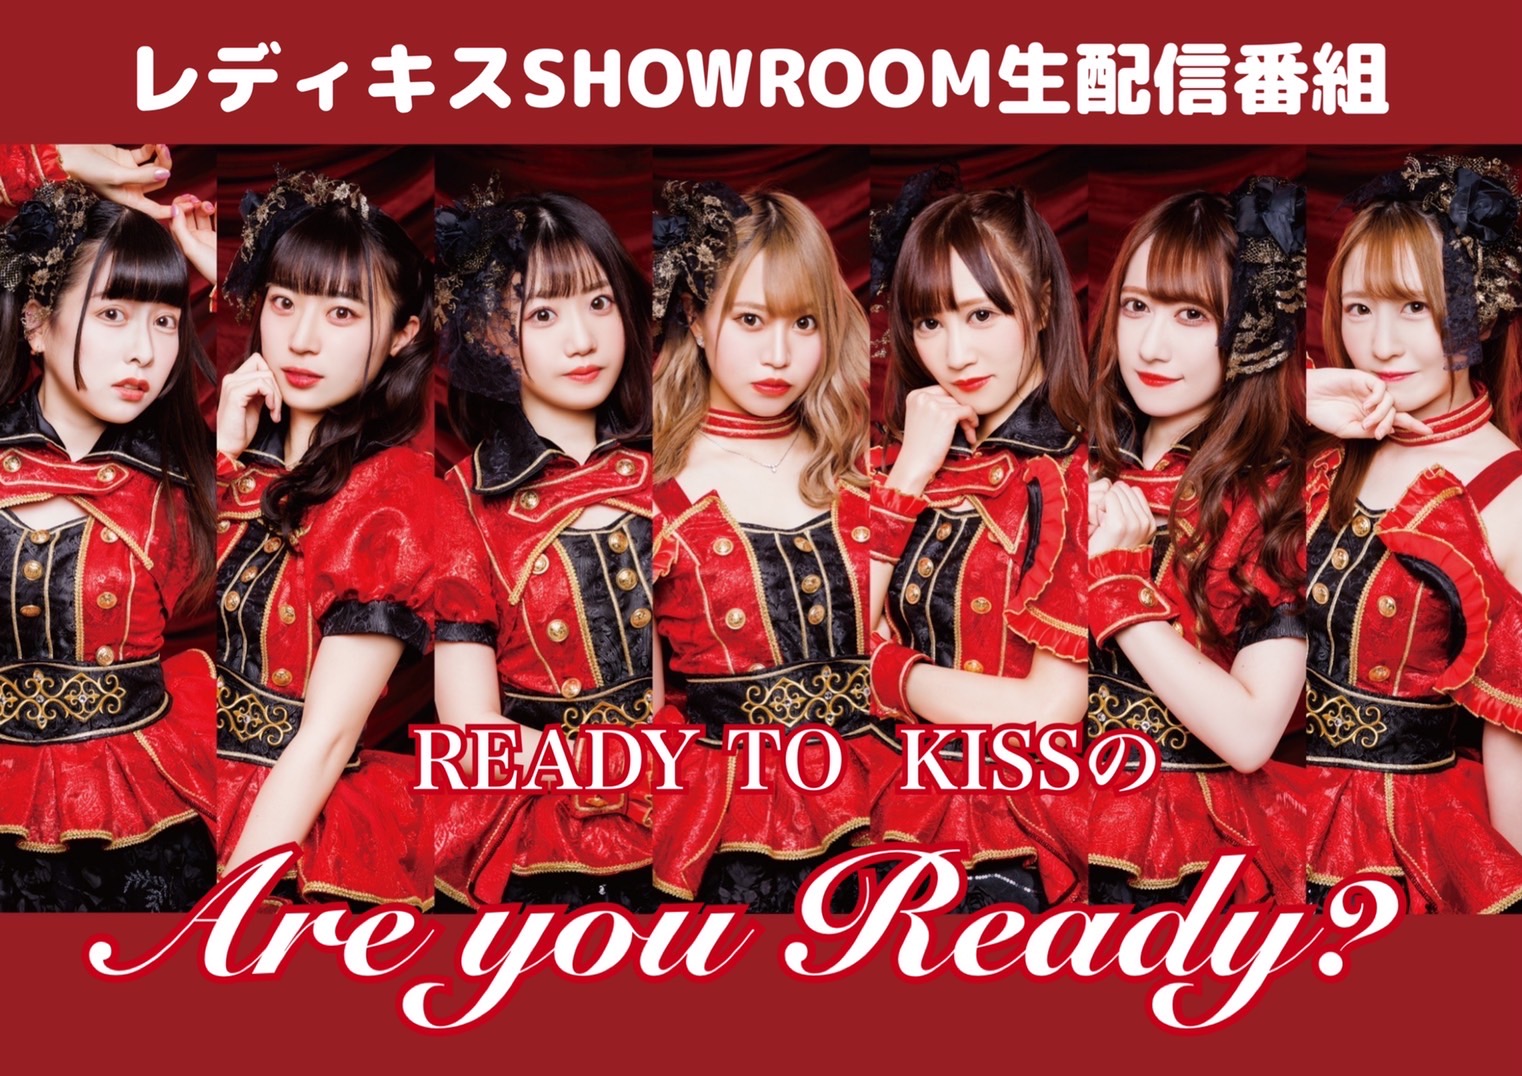 READY TO KISS SHOWROOM配信番組「Are you Ready?」番組観覧